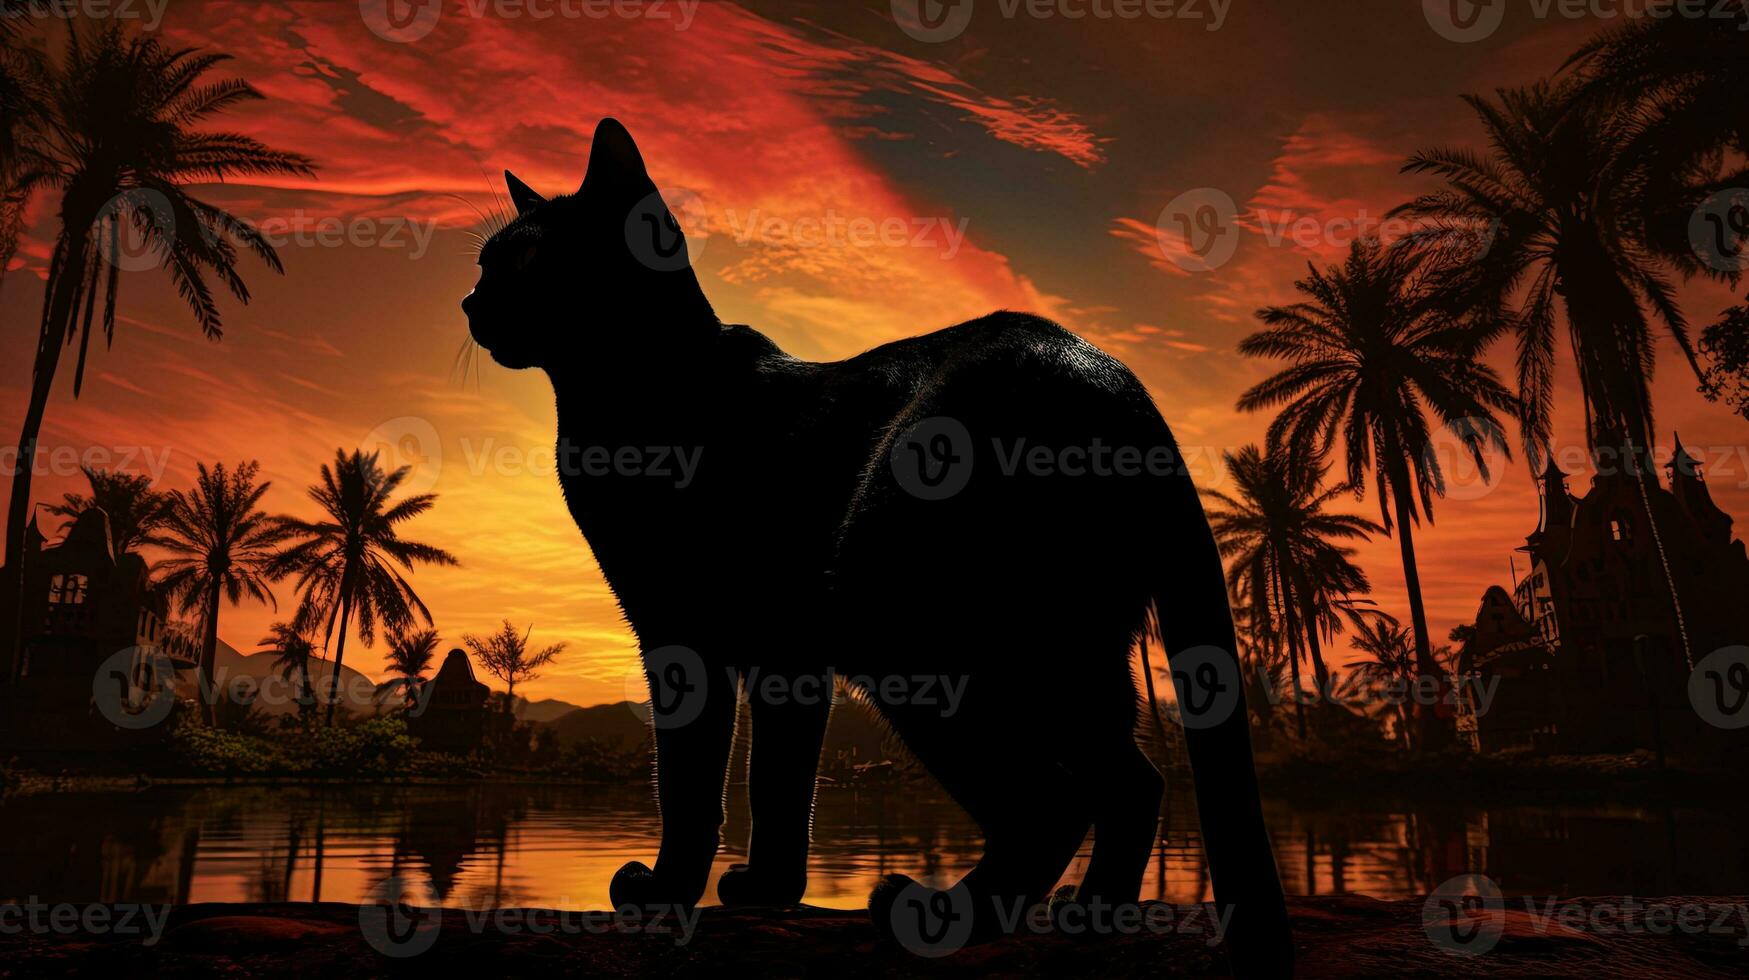 Egyptian cat silhouette against tropical setting photo